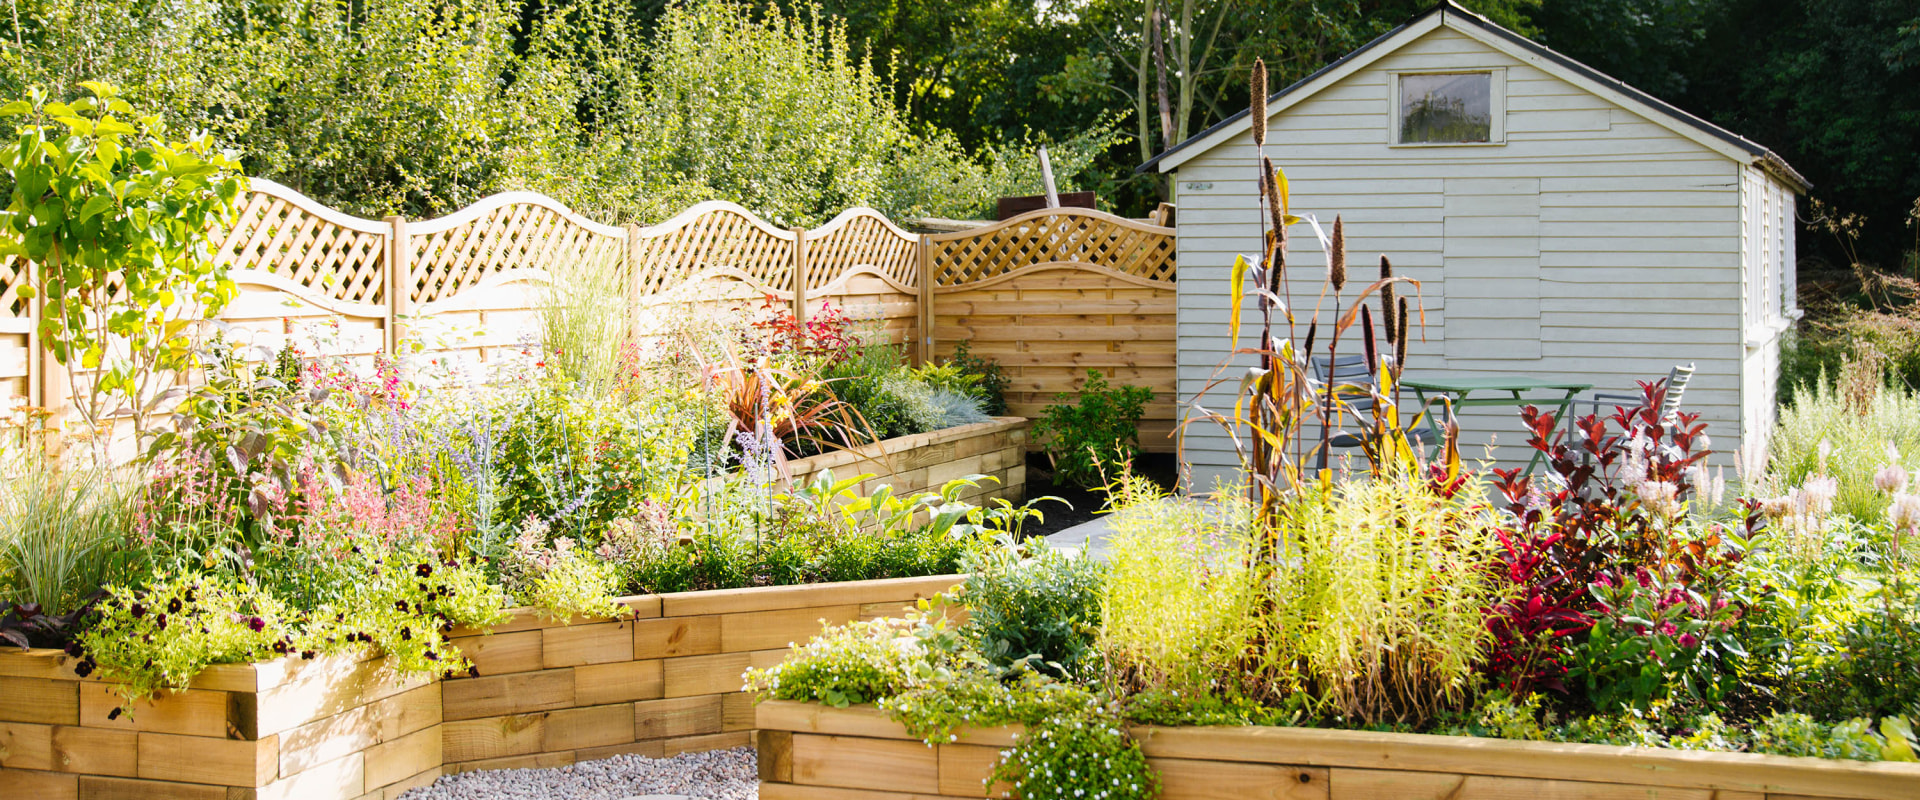 What do you need to do as maintenance for your garden?